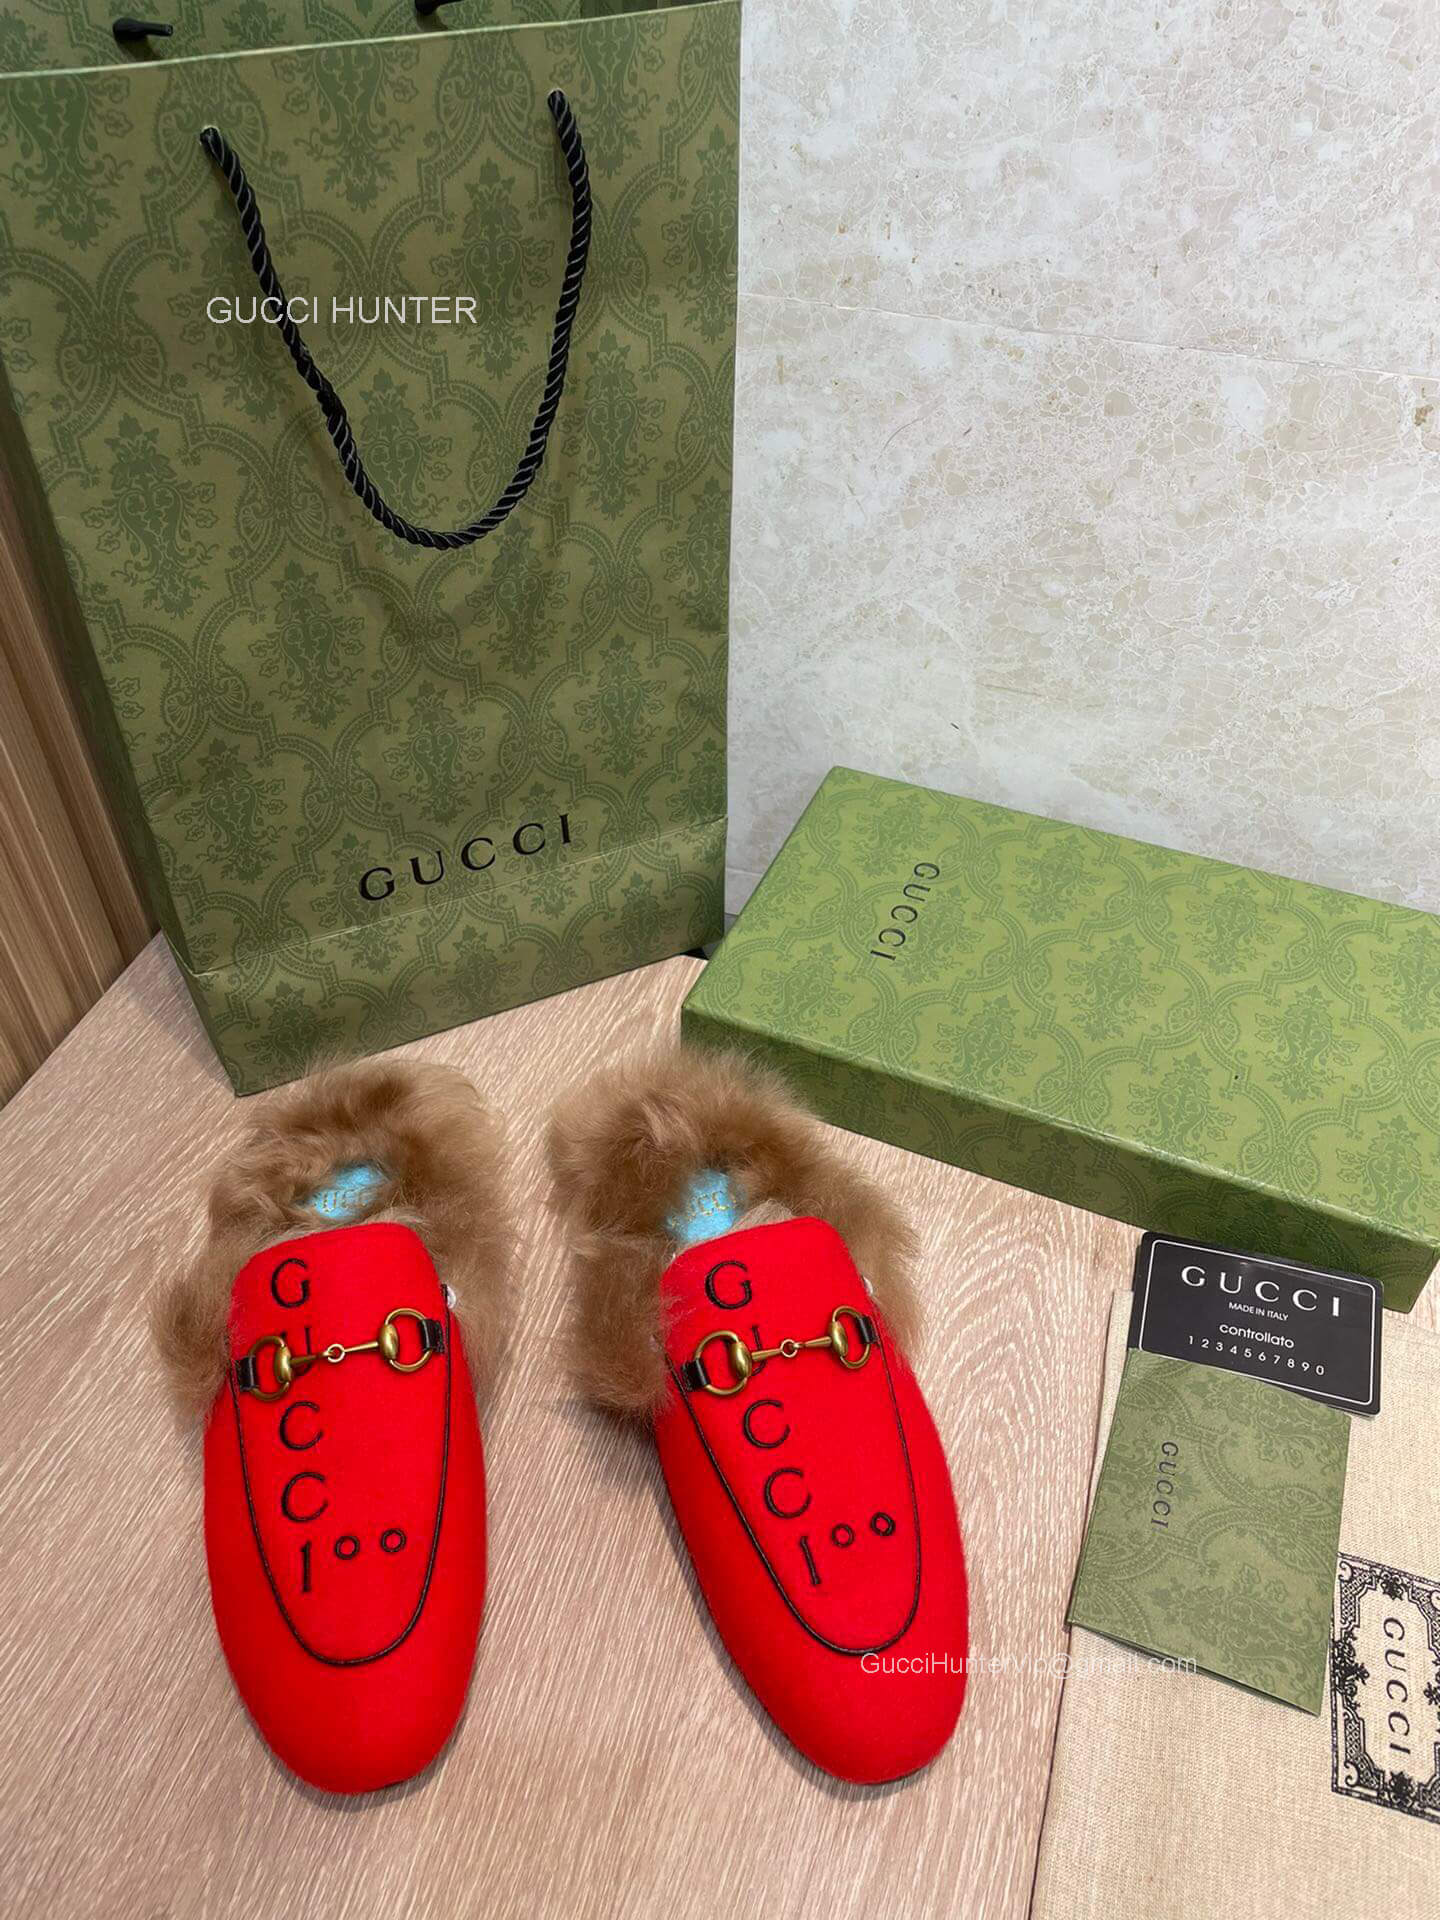 Gucci 100 Princetown Suede Leather Slipper in Red 2281457